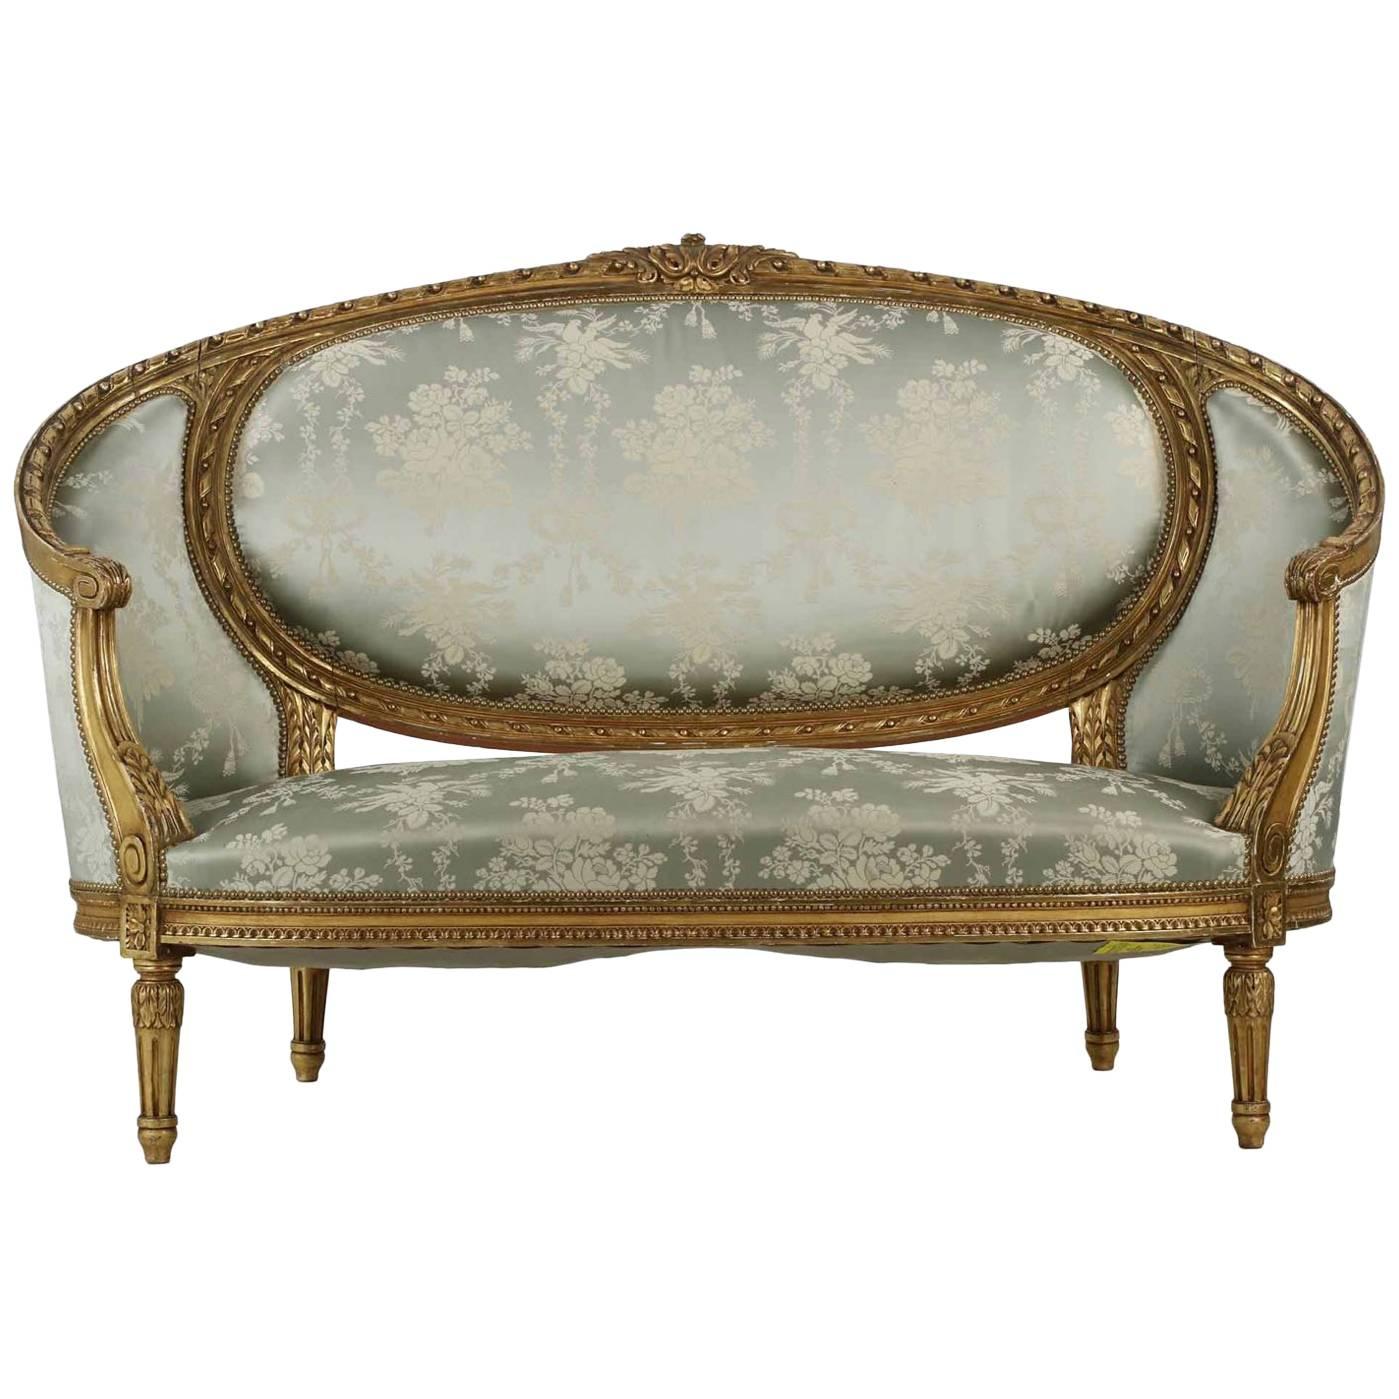 French Louis XVI Style Carved Giltwood Antique Canapé Sofa